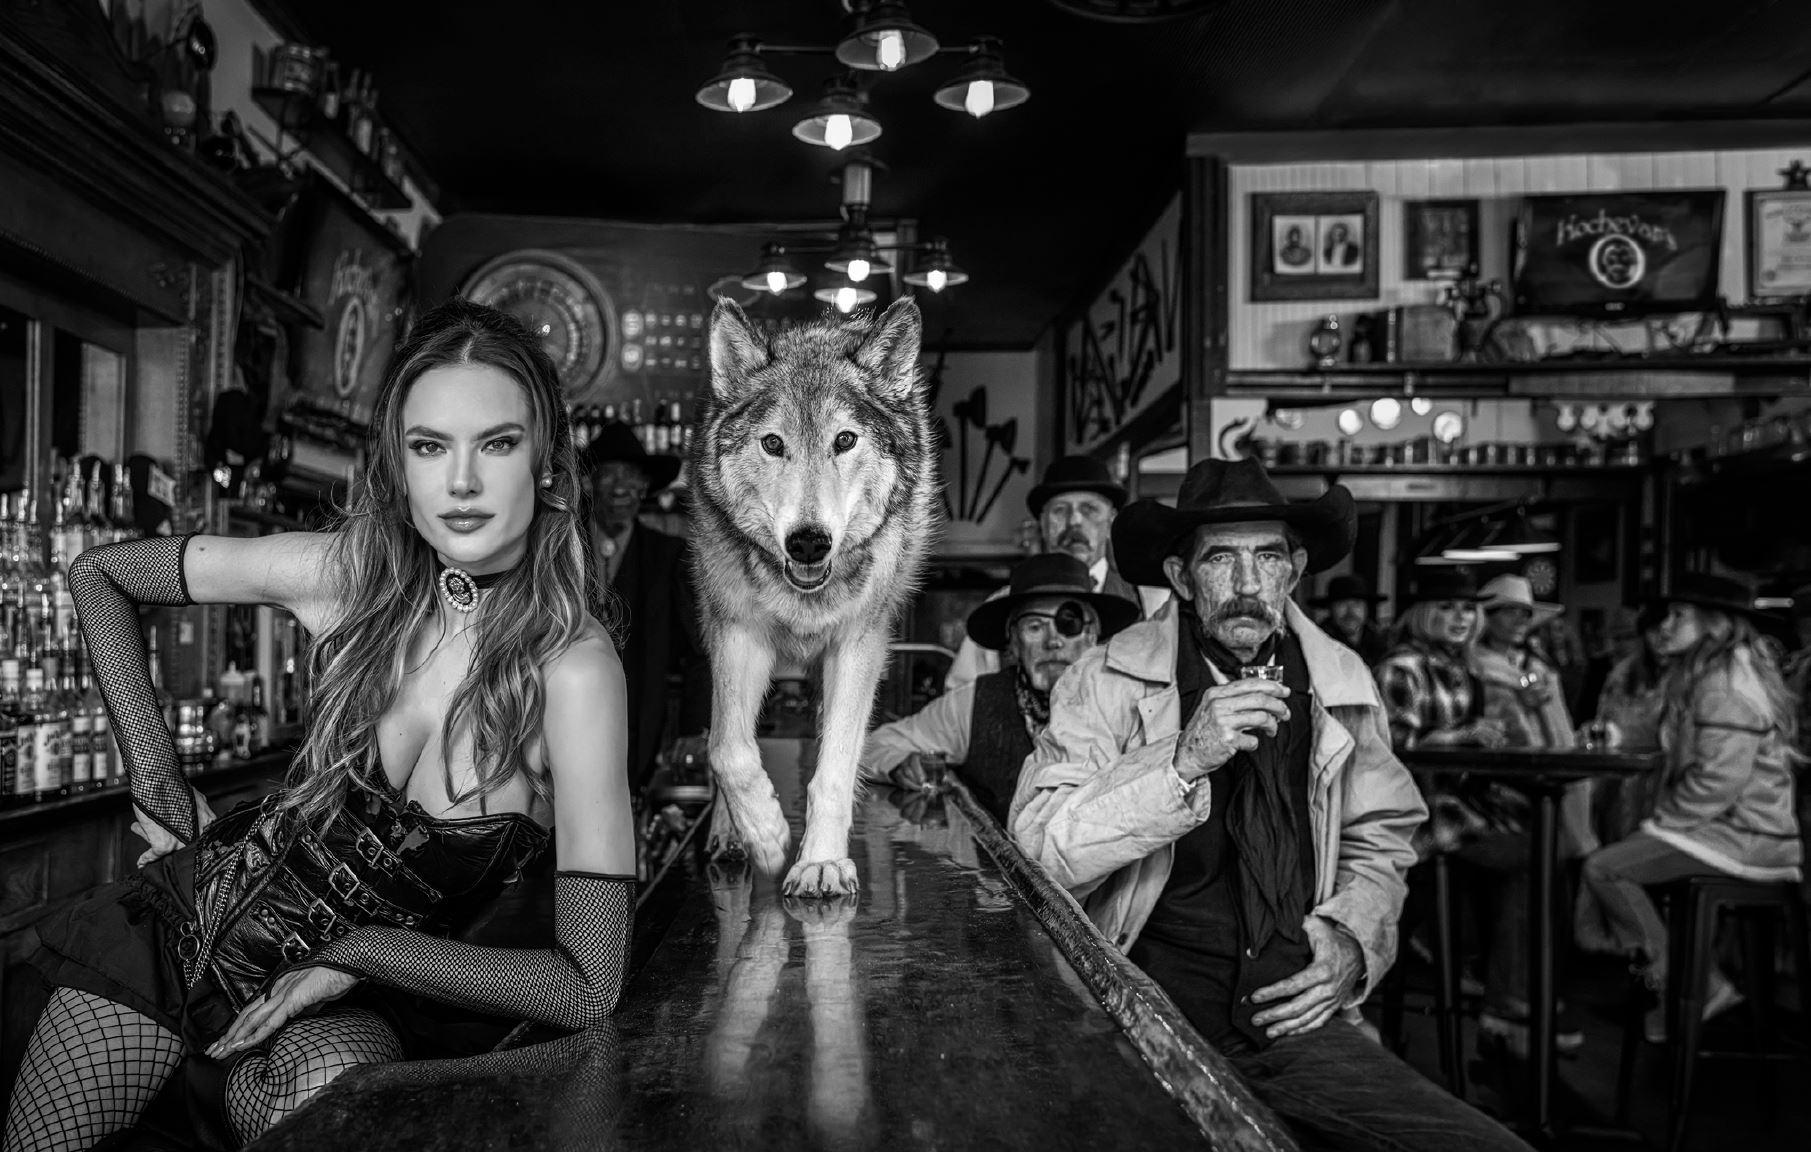 David Yarrow Black and White Photograph - Kochevars, Crested Butte - Model and Wolf in old Bar, fine art photography, 2024